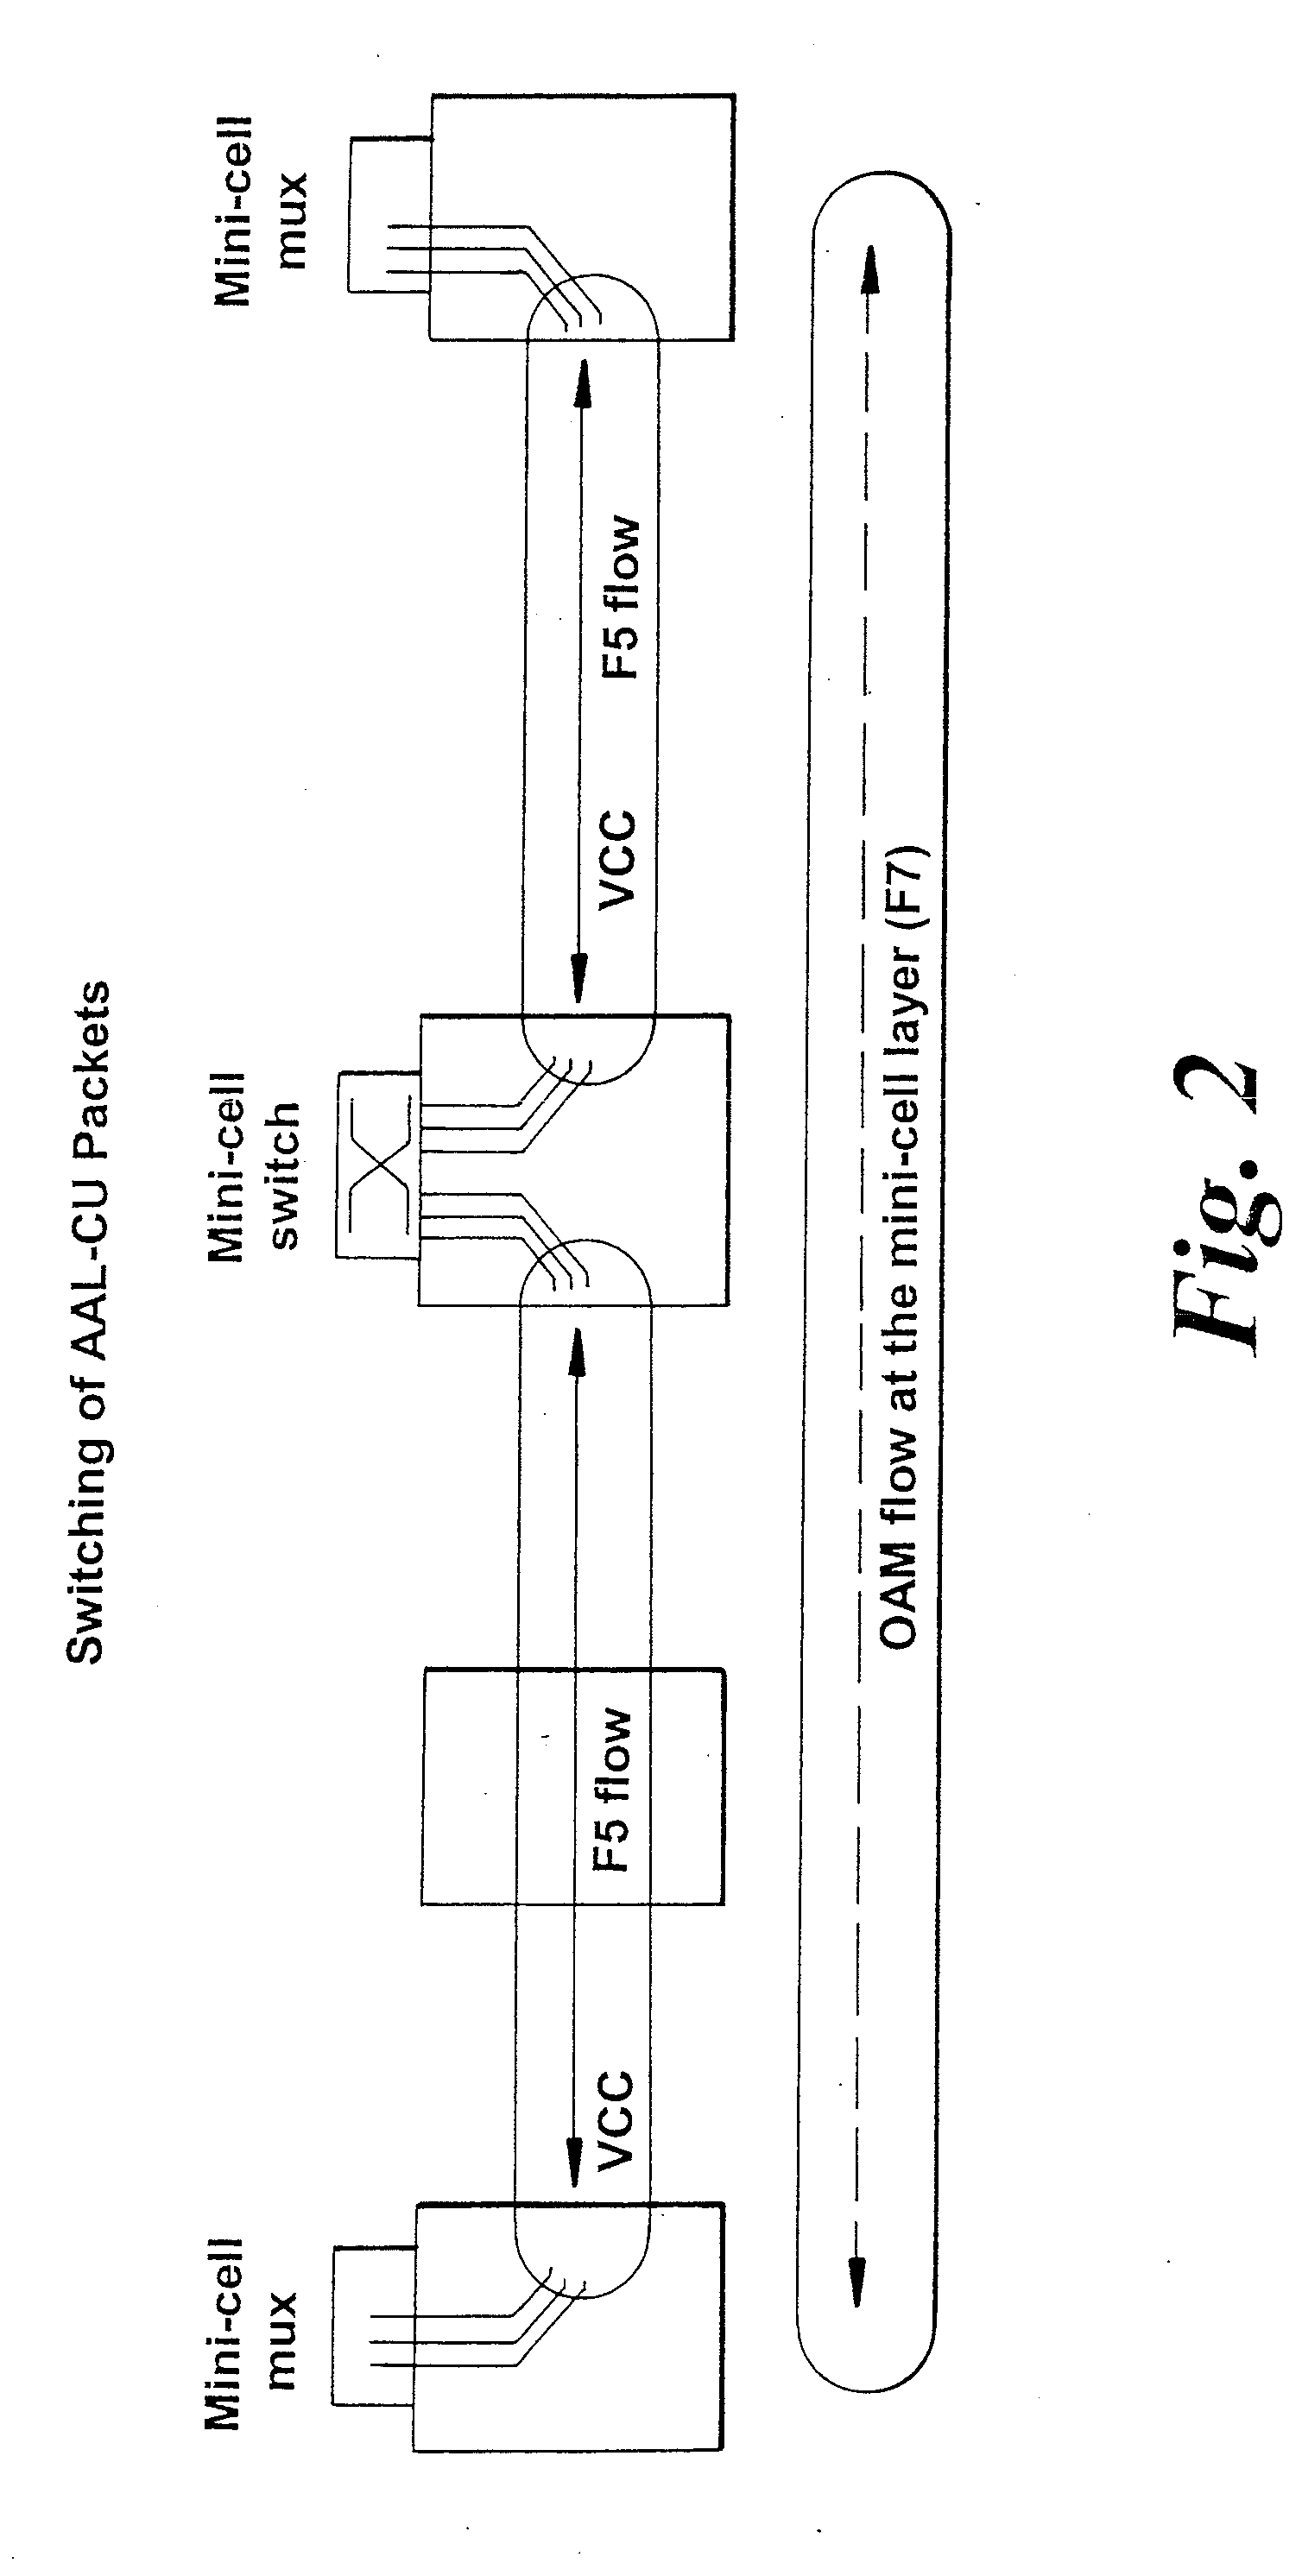 ATM communications system and method